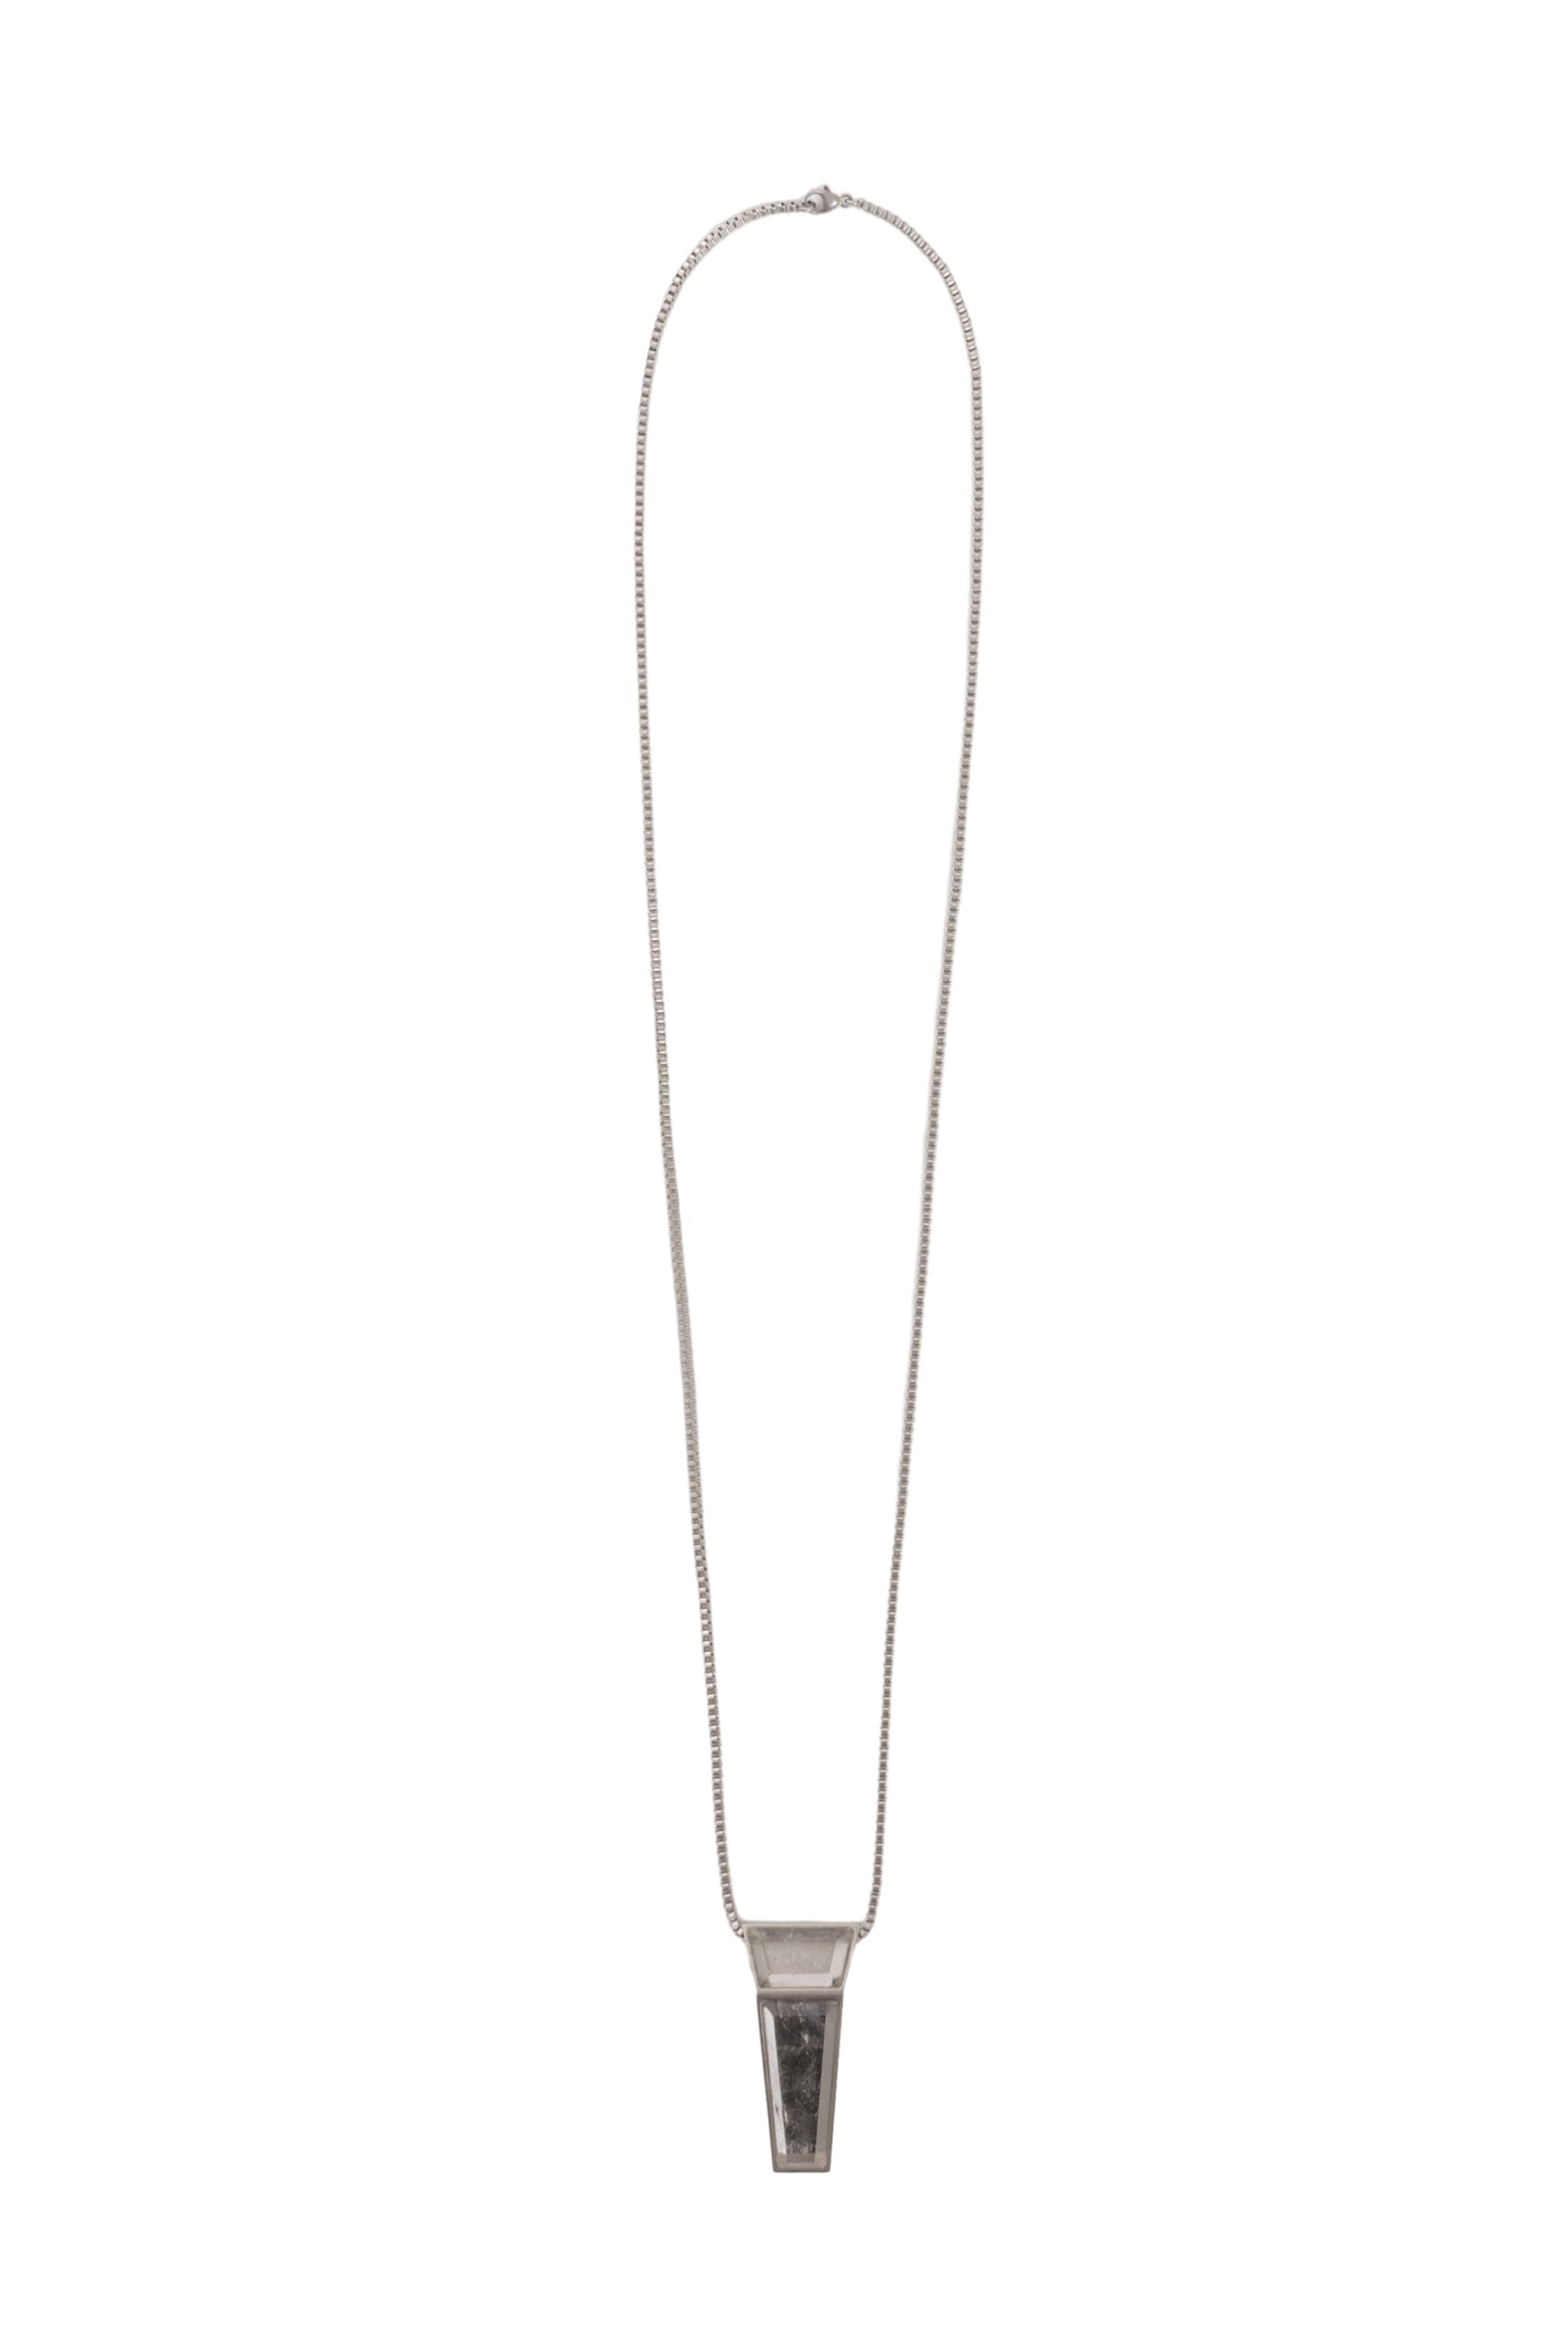 [Rick Owens] Trunk Charm Necklace